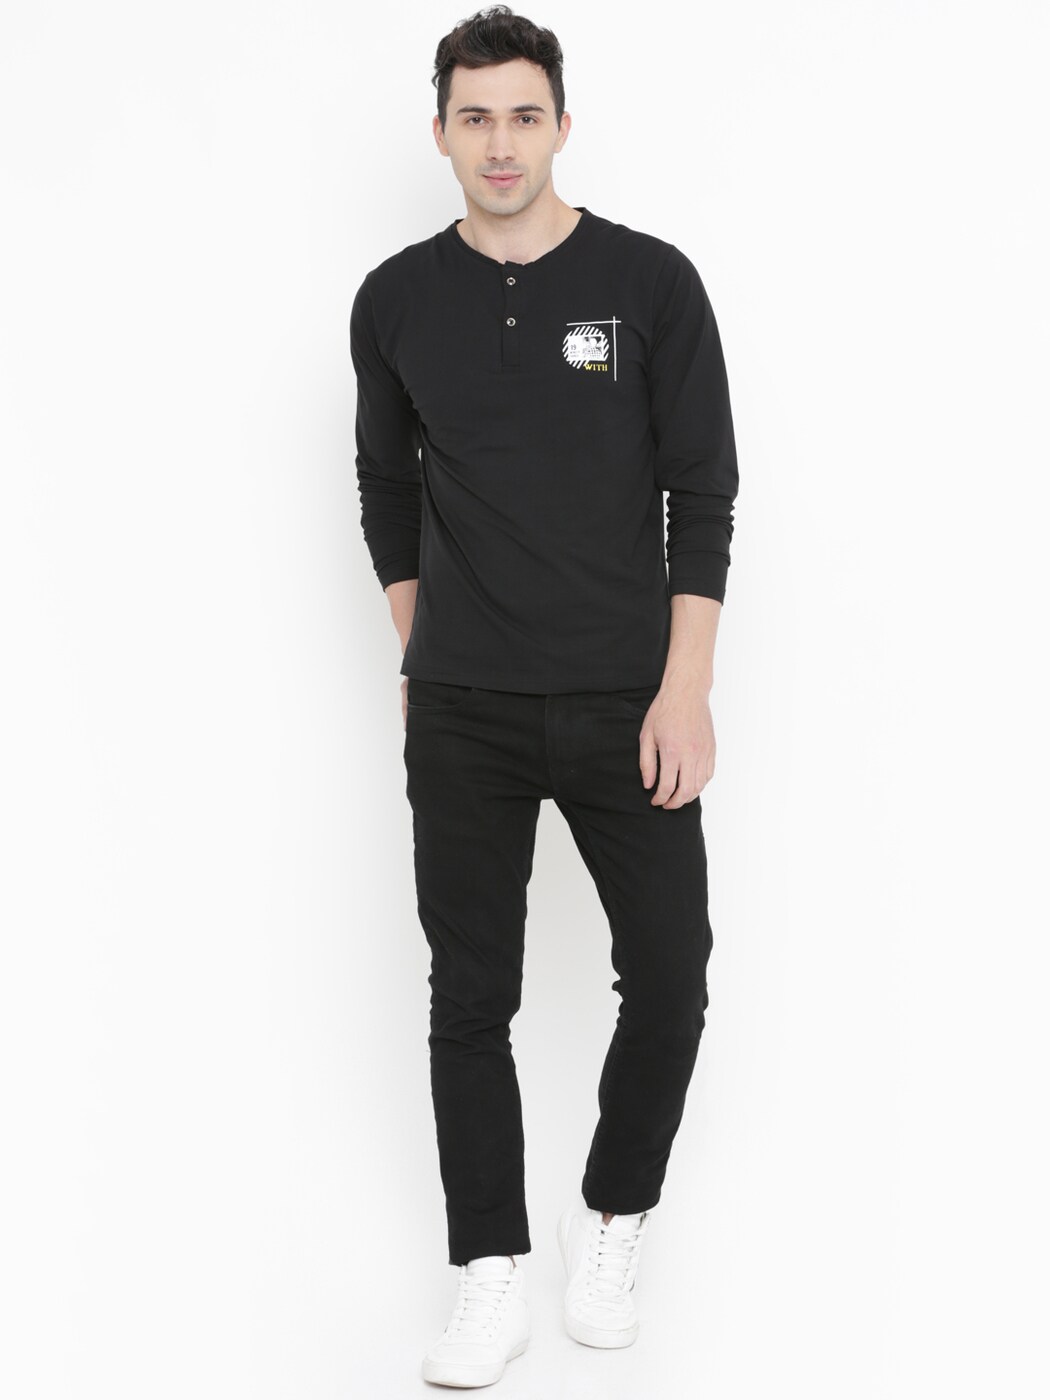 Buy Black WITH Solid Slim Fit Henley T-shirt | AJIO